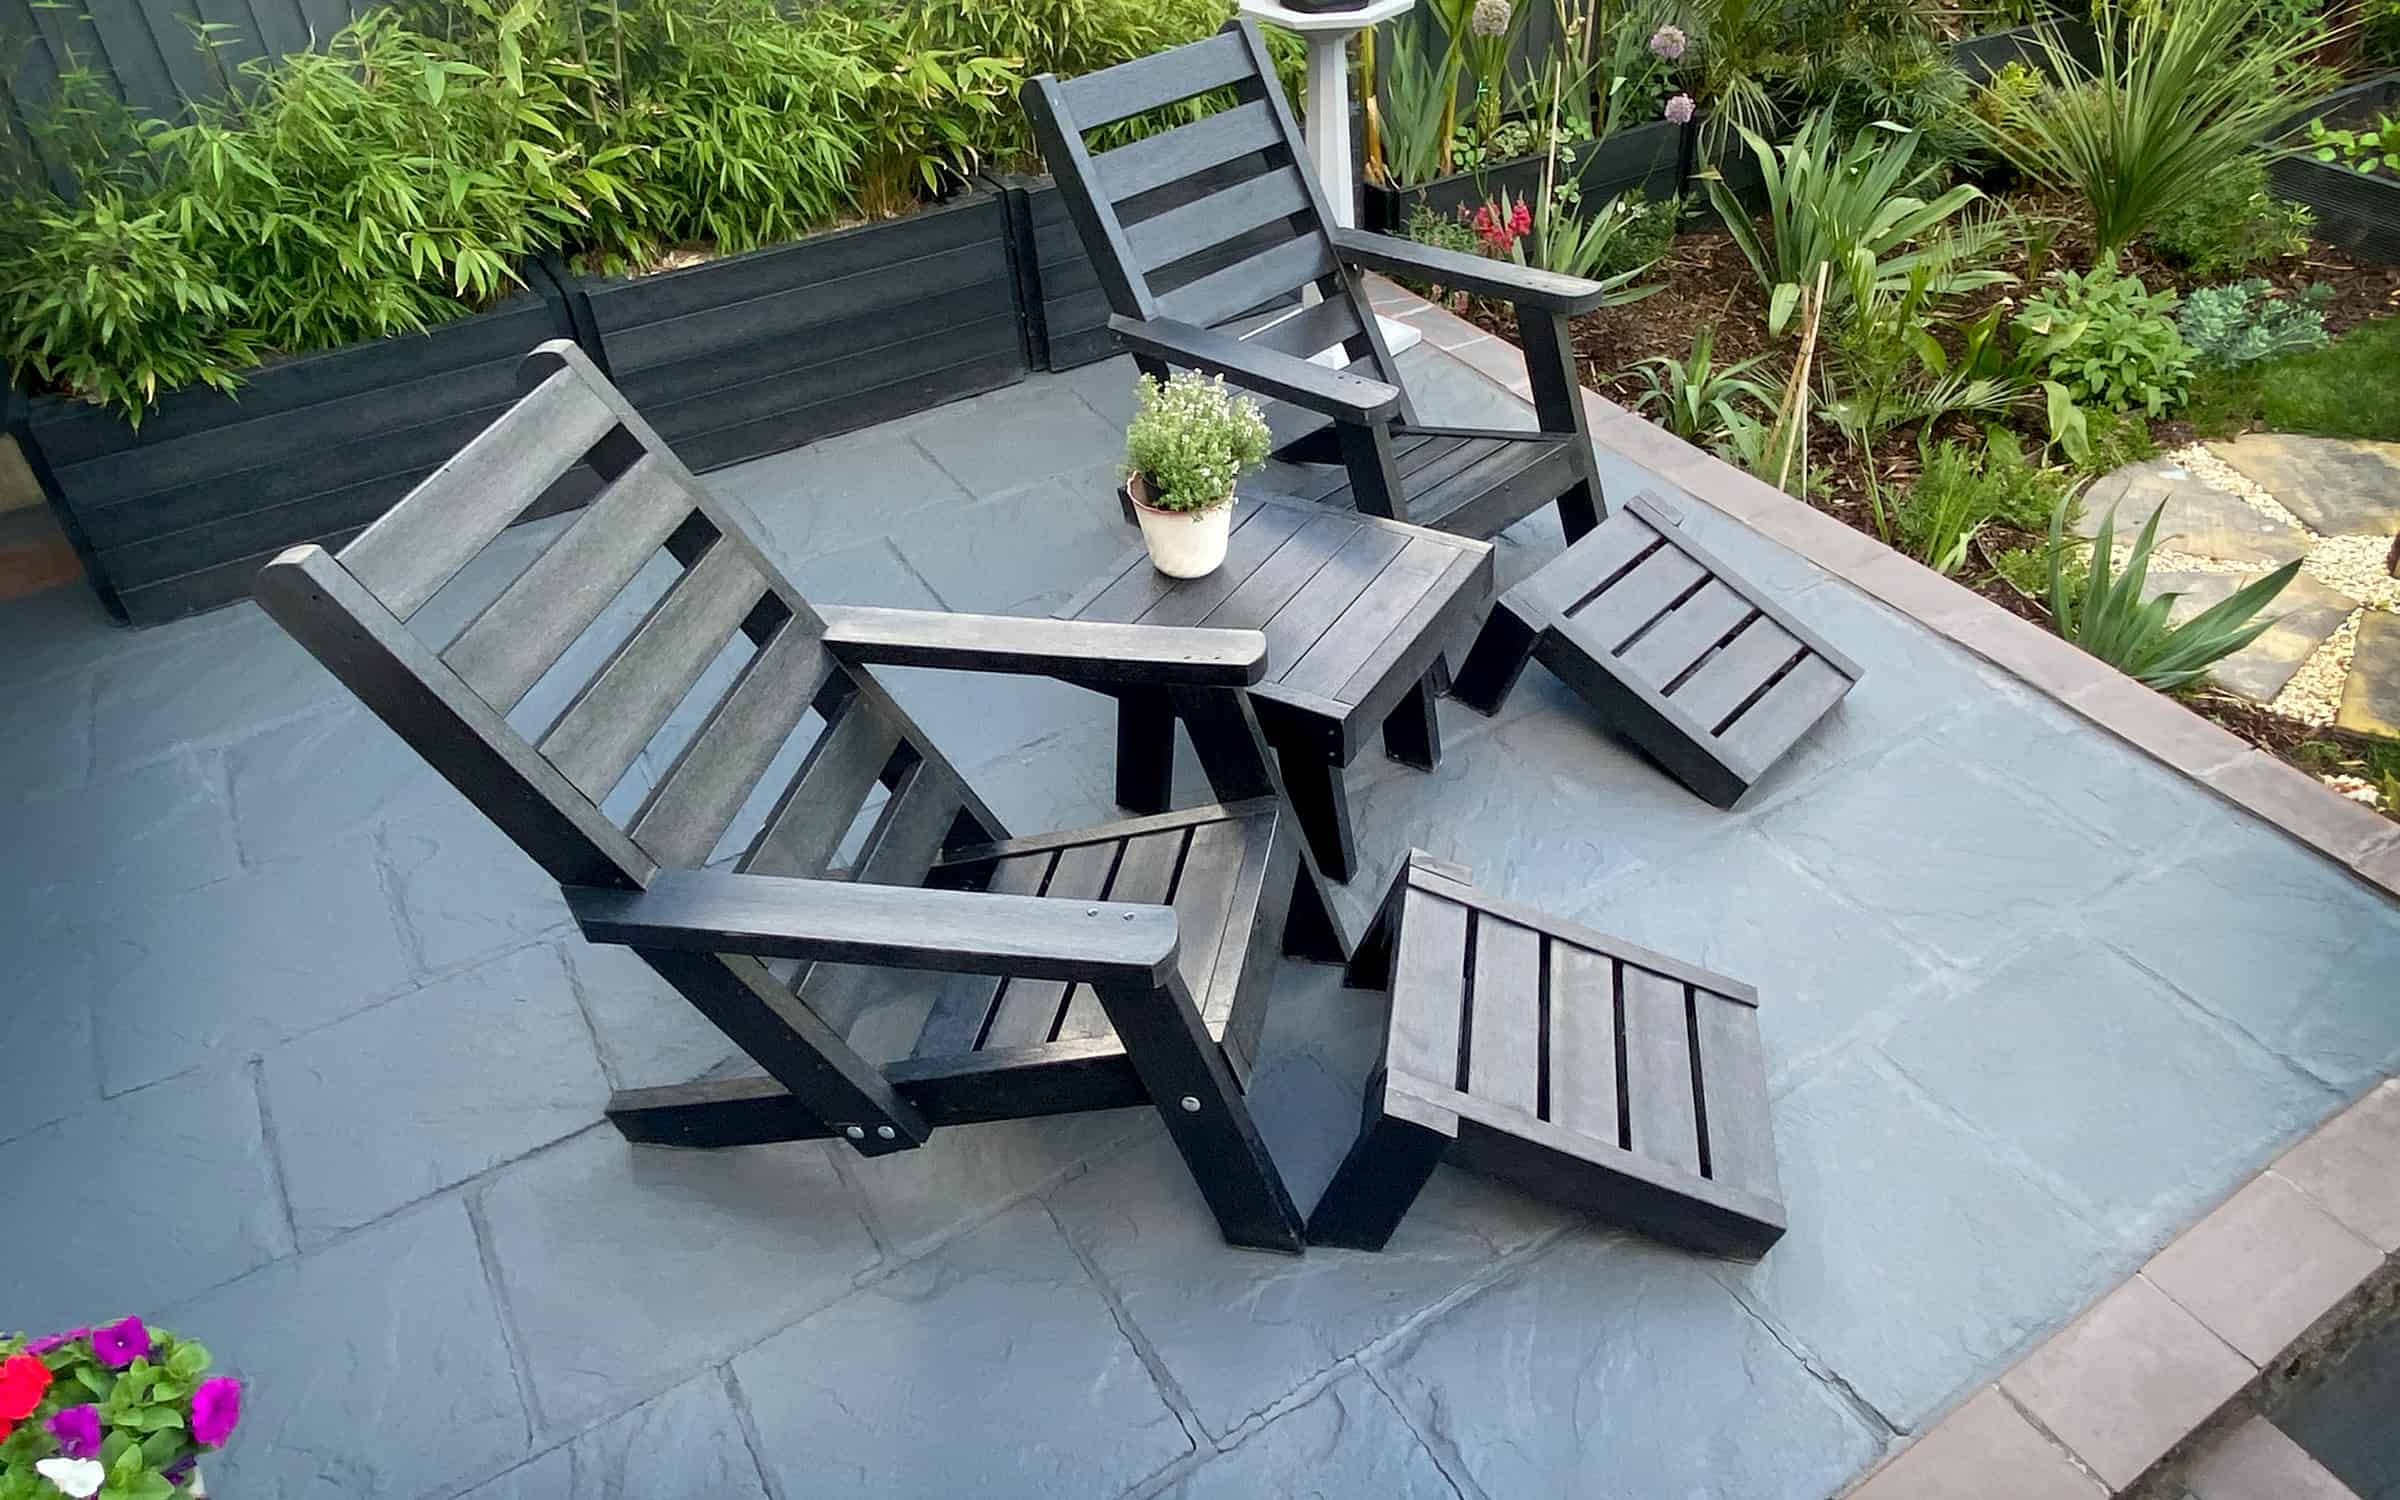 Recycled plastic seating - chill out sun lounger set